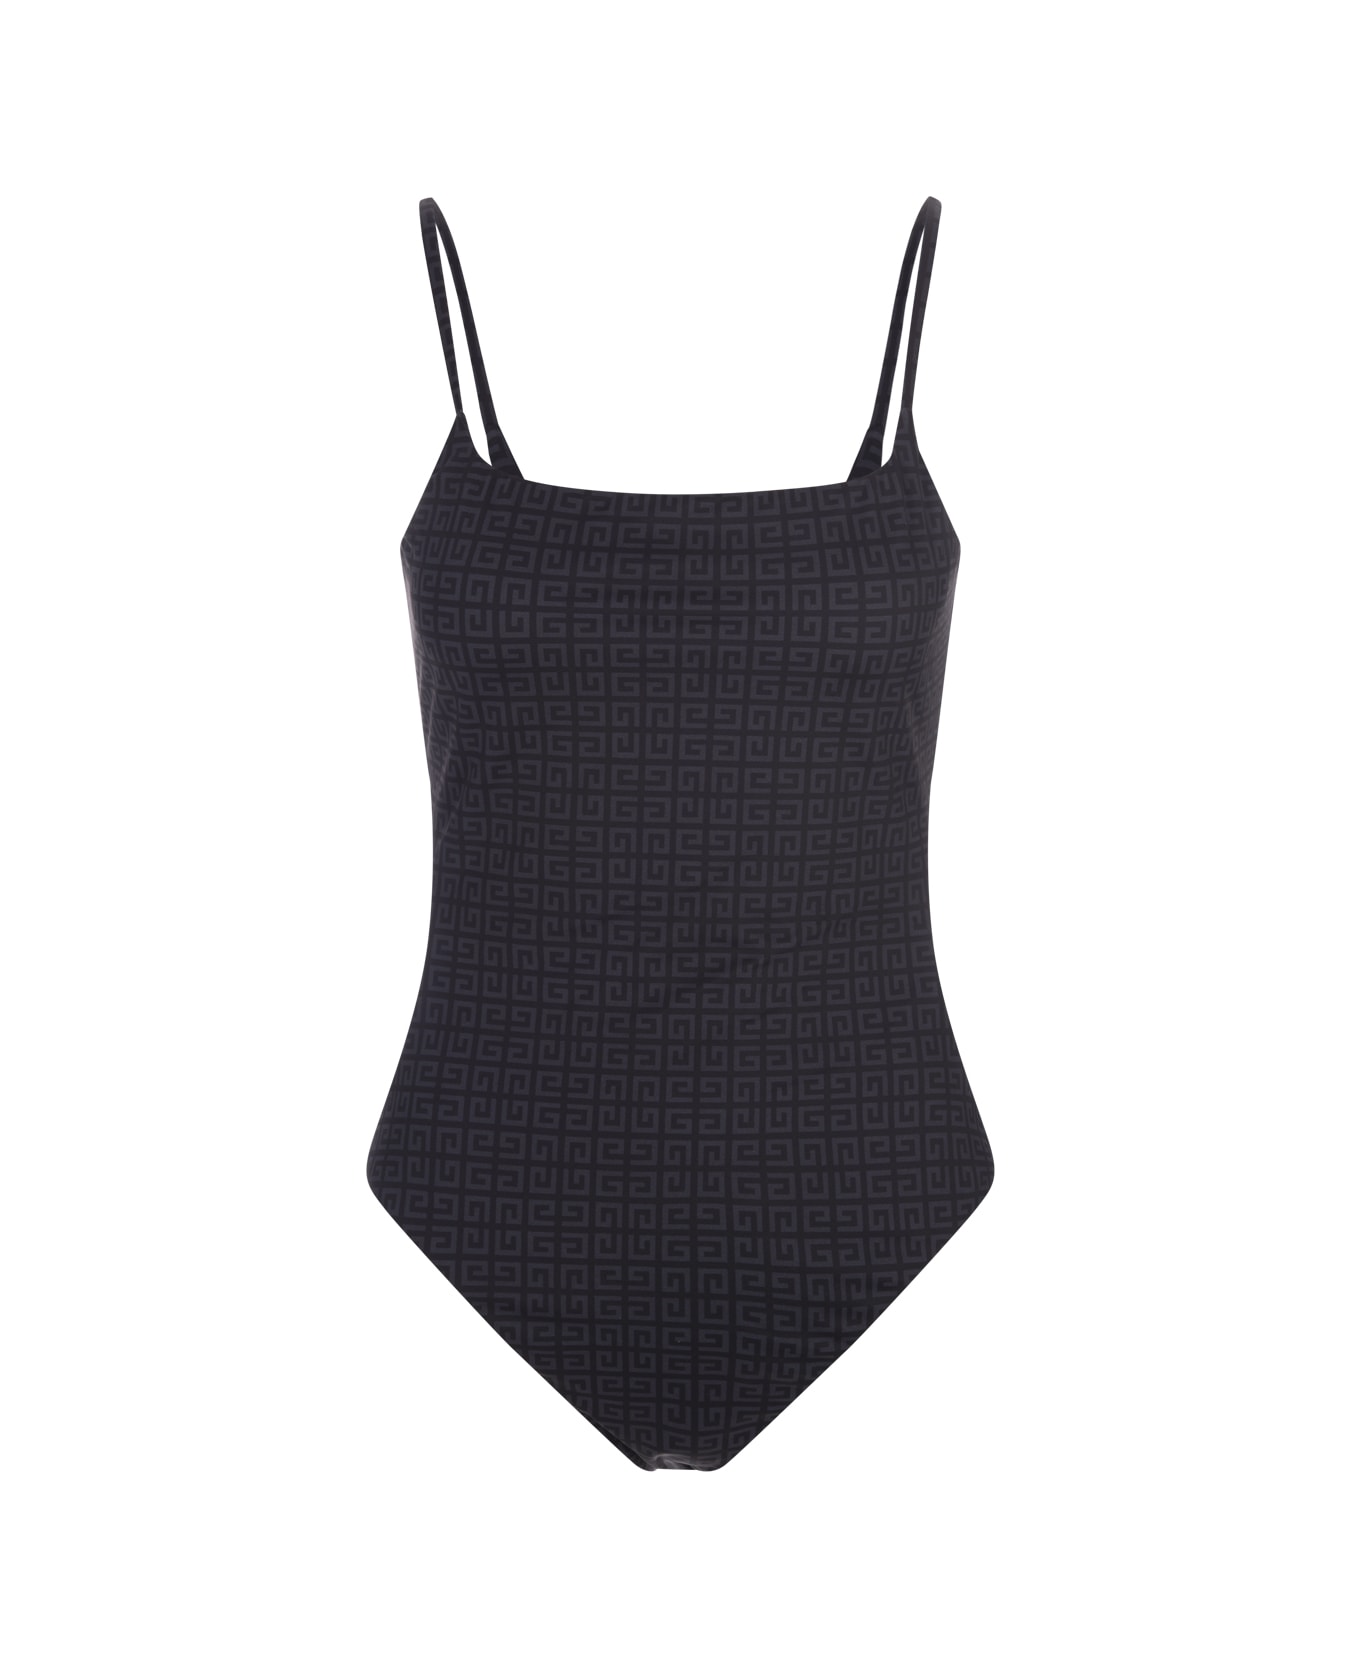 Givenchy Black One Piece Swimsuit In 4g Recycled Nylon - Black